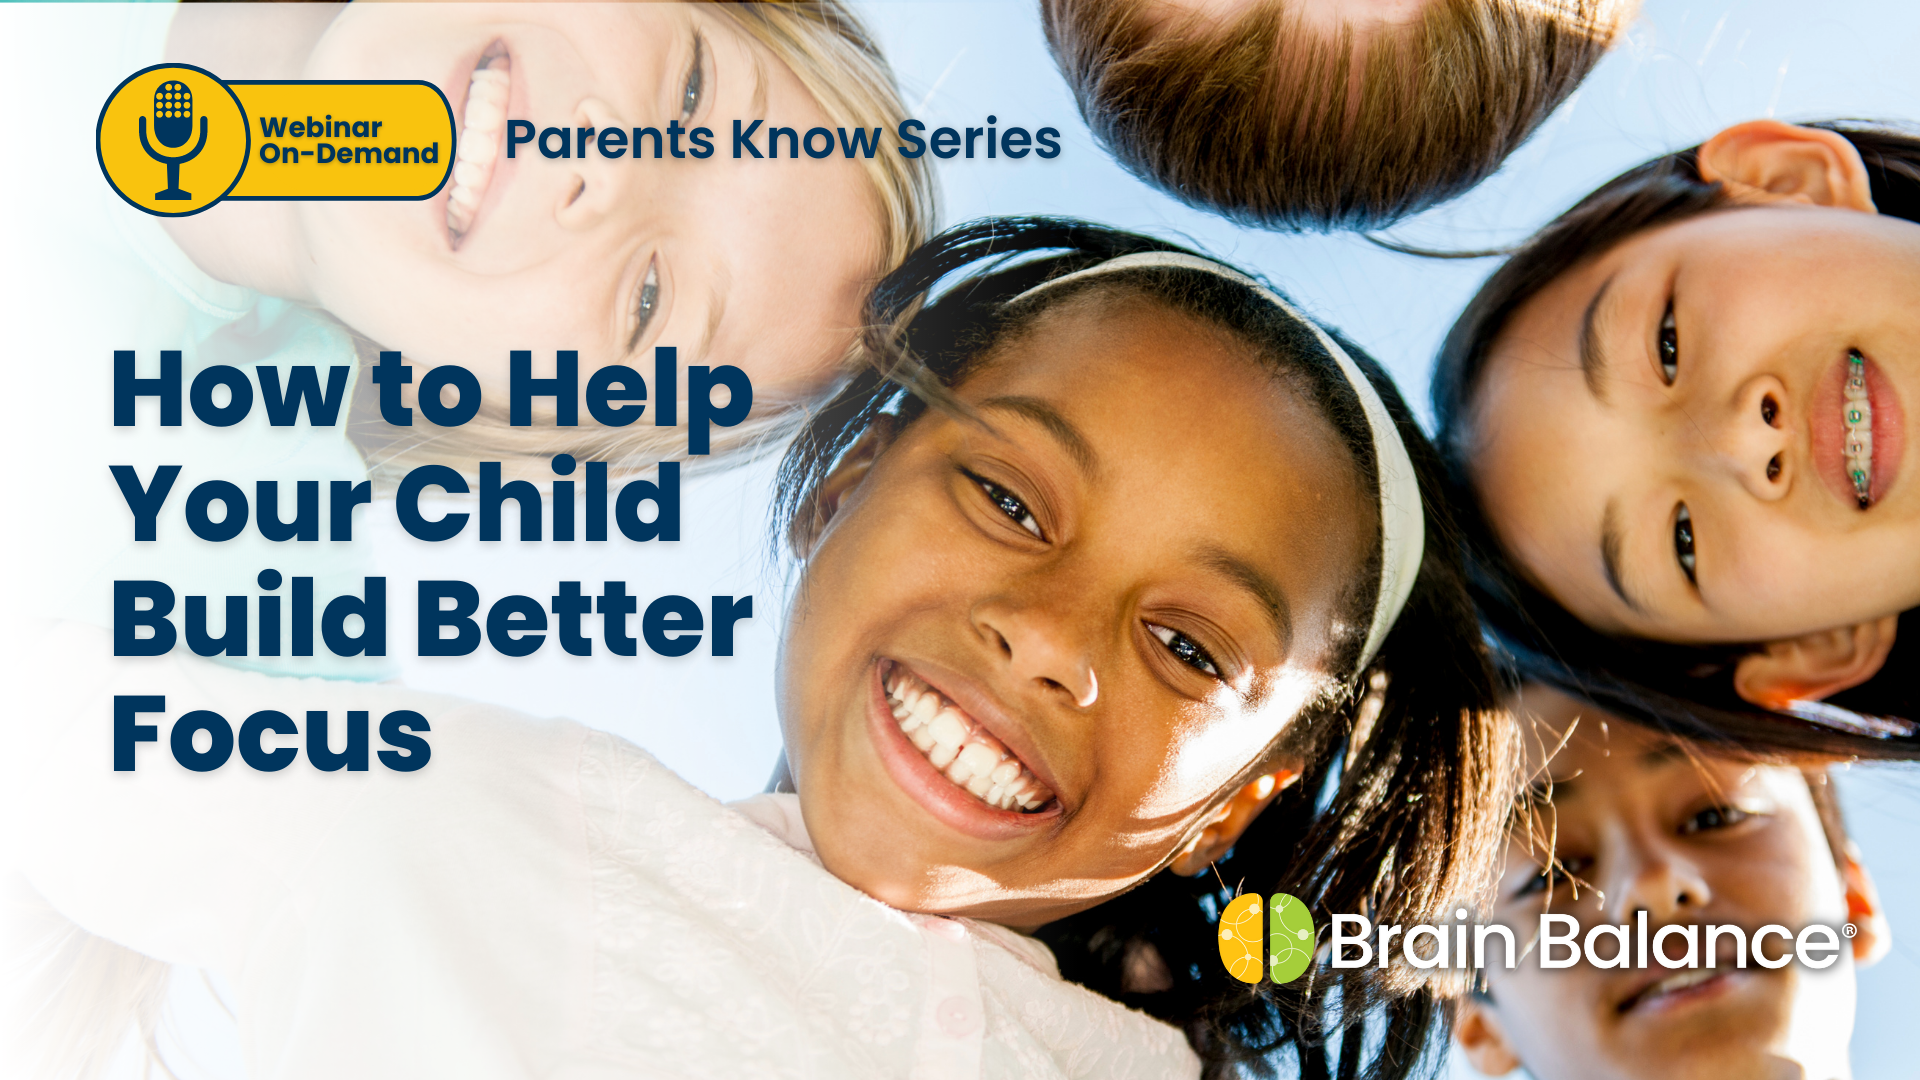 How to Help Your Child Build Better Focus